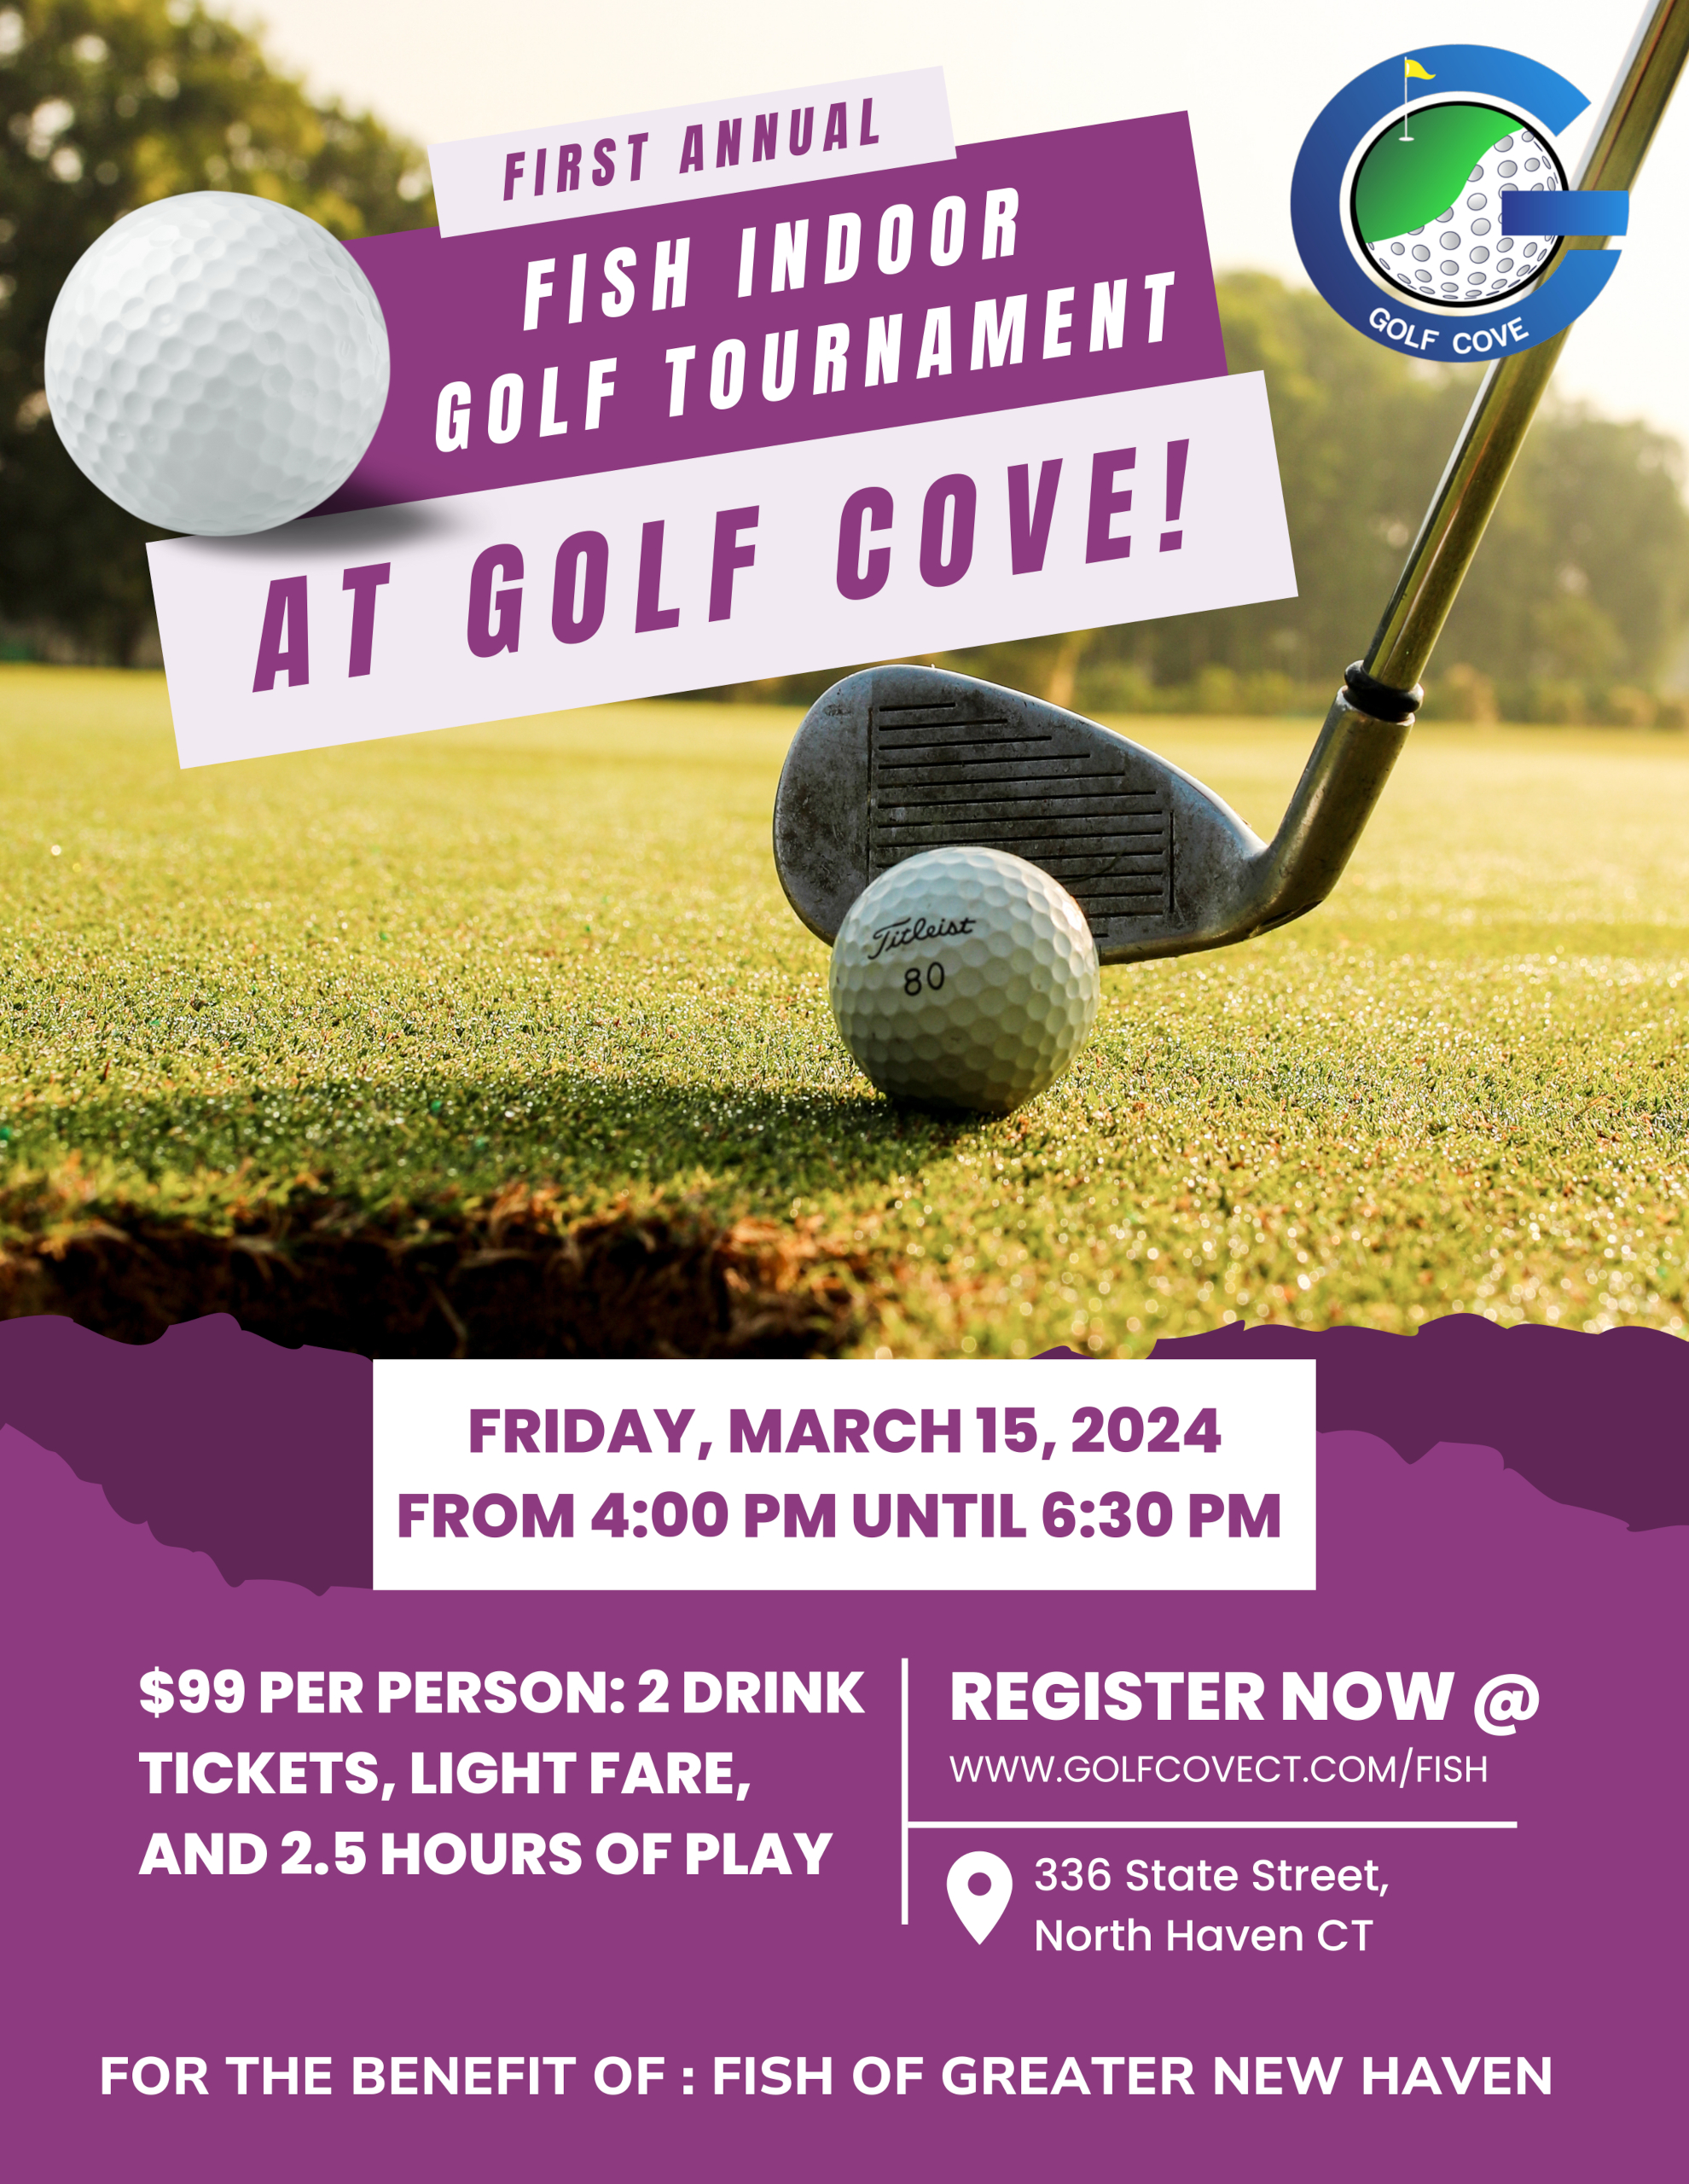 Golf Cove | FISH - (January 2024) Golf Cove FISH – (January 2024) GC (2024) First Annual Golf Cove Indoor Golf Tournament (Flyer)